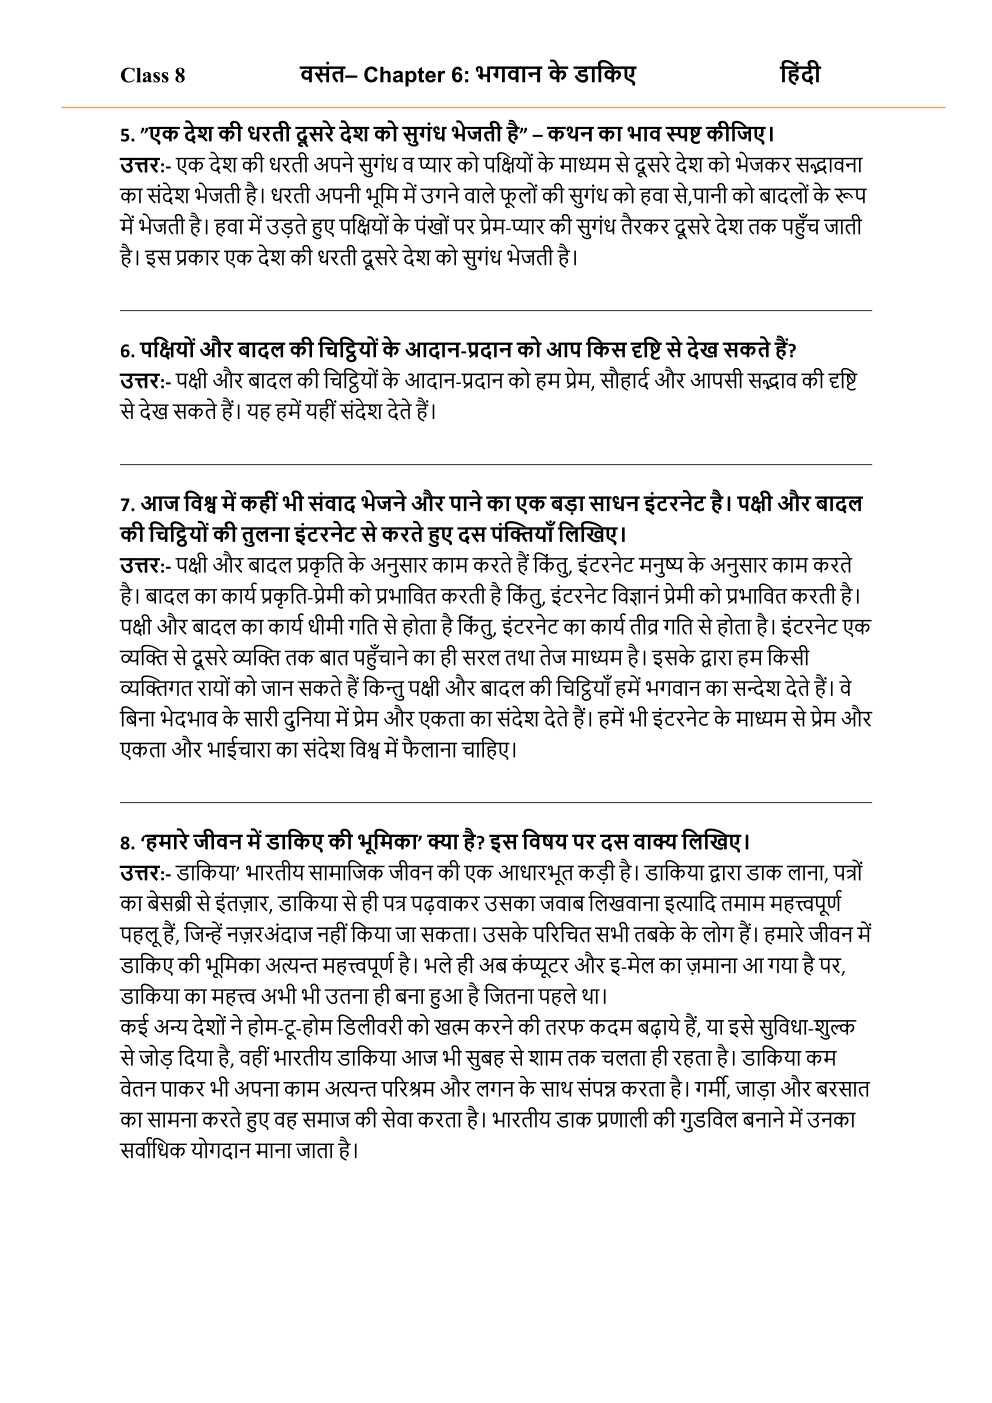 NCERT Solutions For Class 8 Hindi Vasant Chapter 6